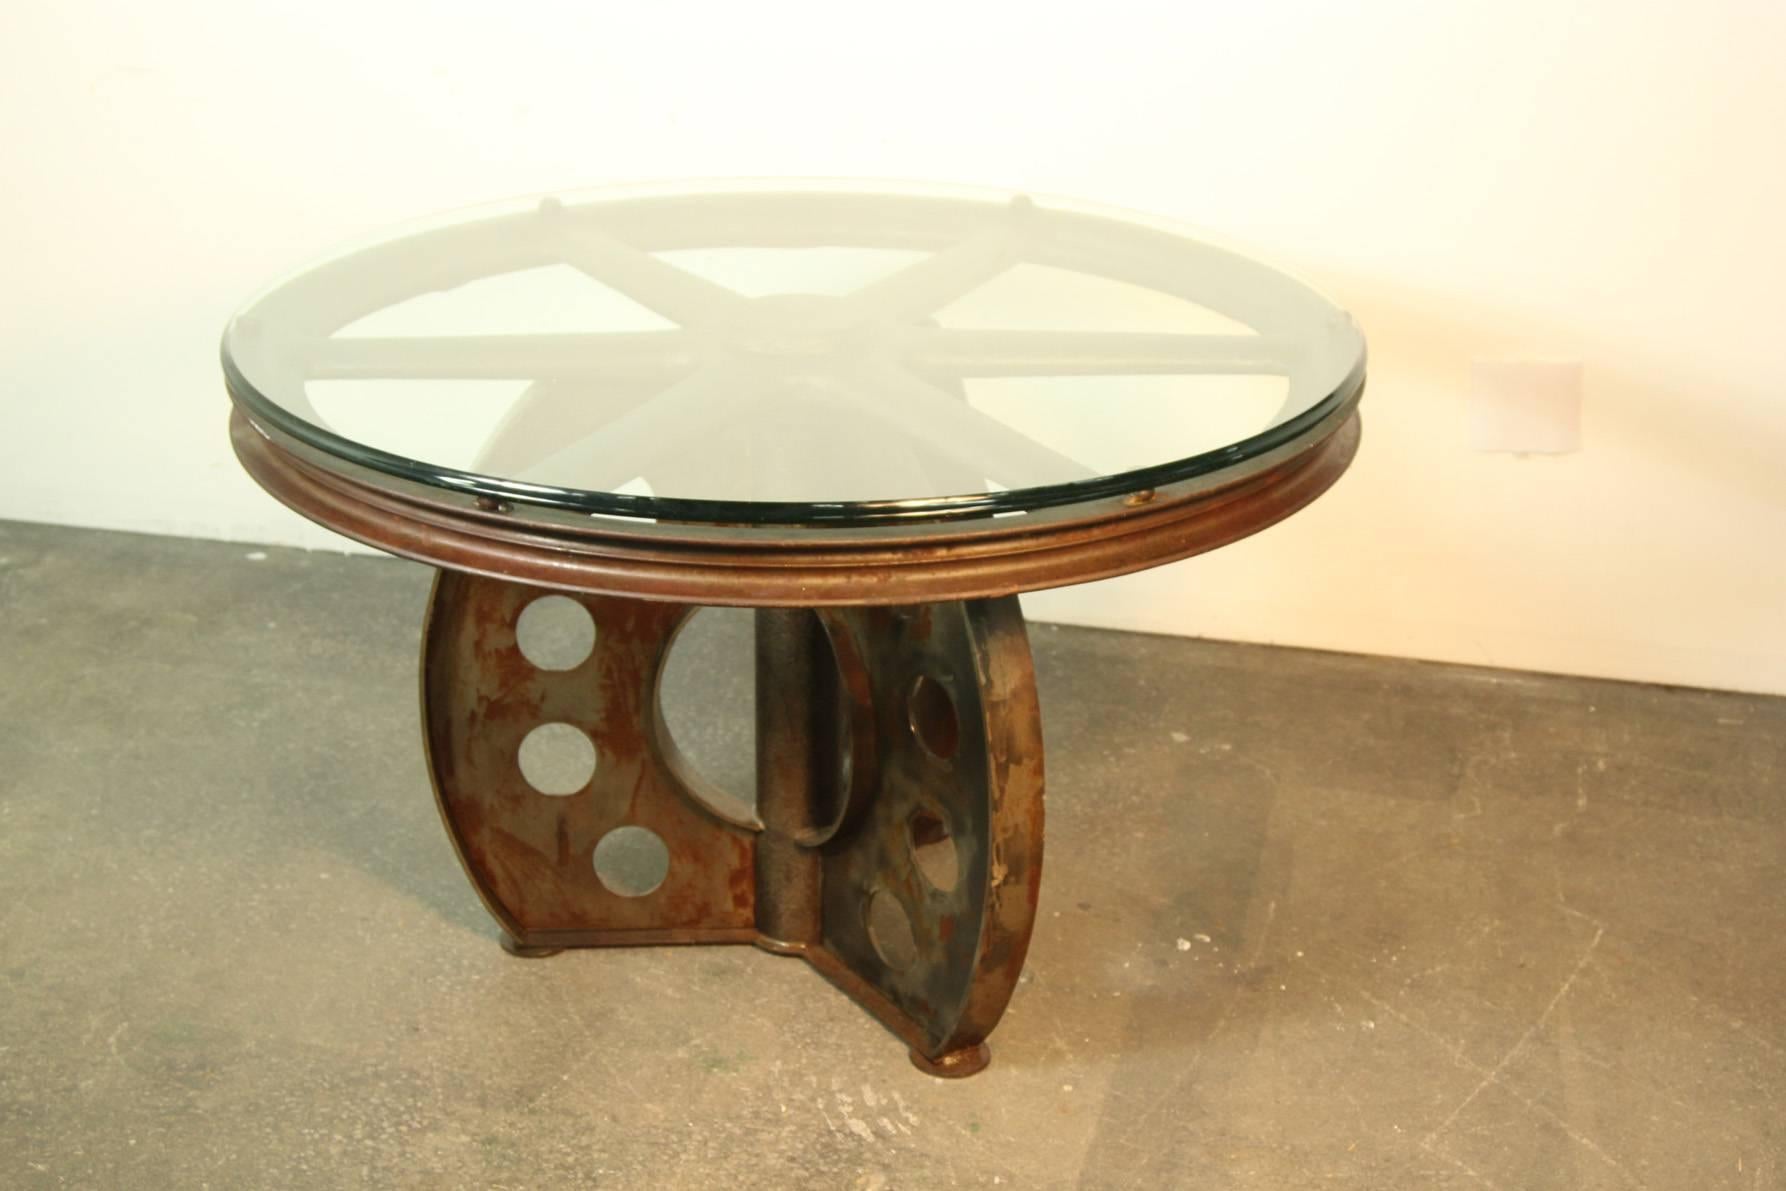 This wheel was rescued from a recycling mill in Manchester New Hampshire.  Originally came from a 19th century New England textile mill.  The base was made from reclaimed metal and was made for the wheel to make this impressive, beautiful dining